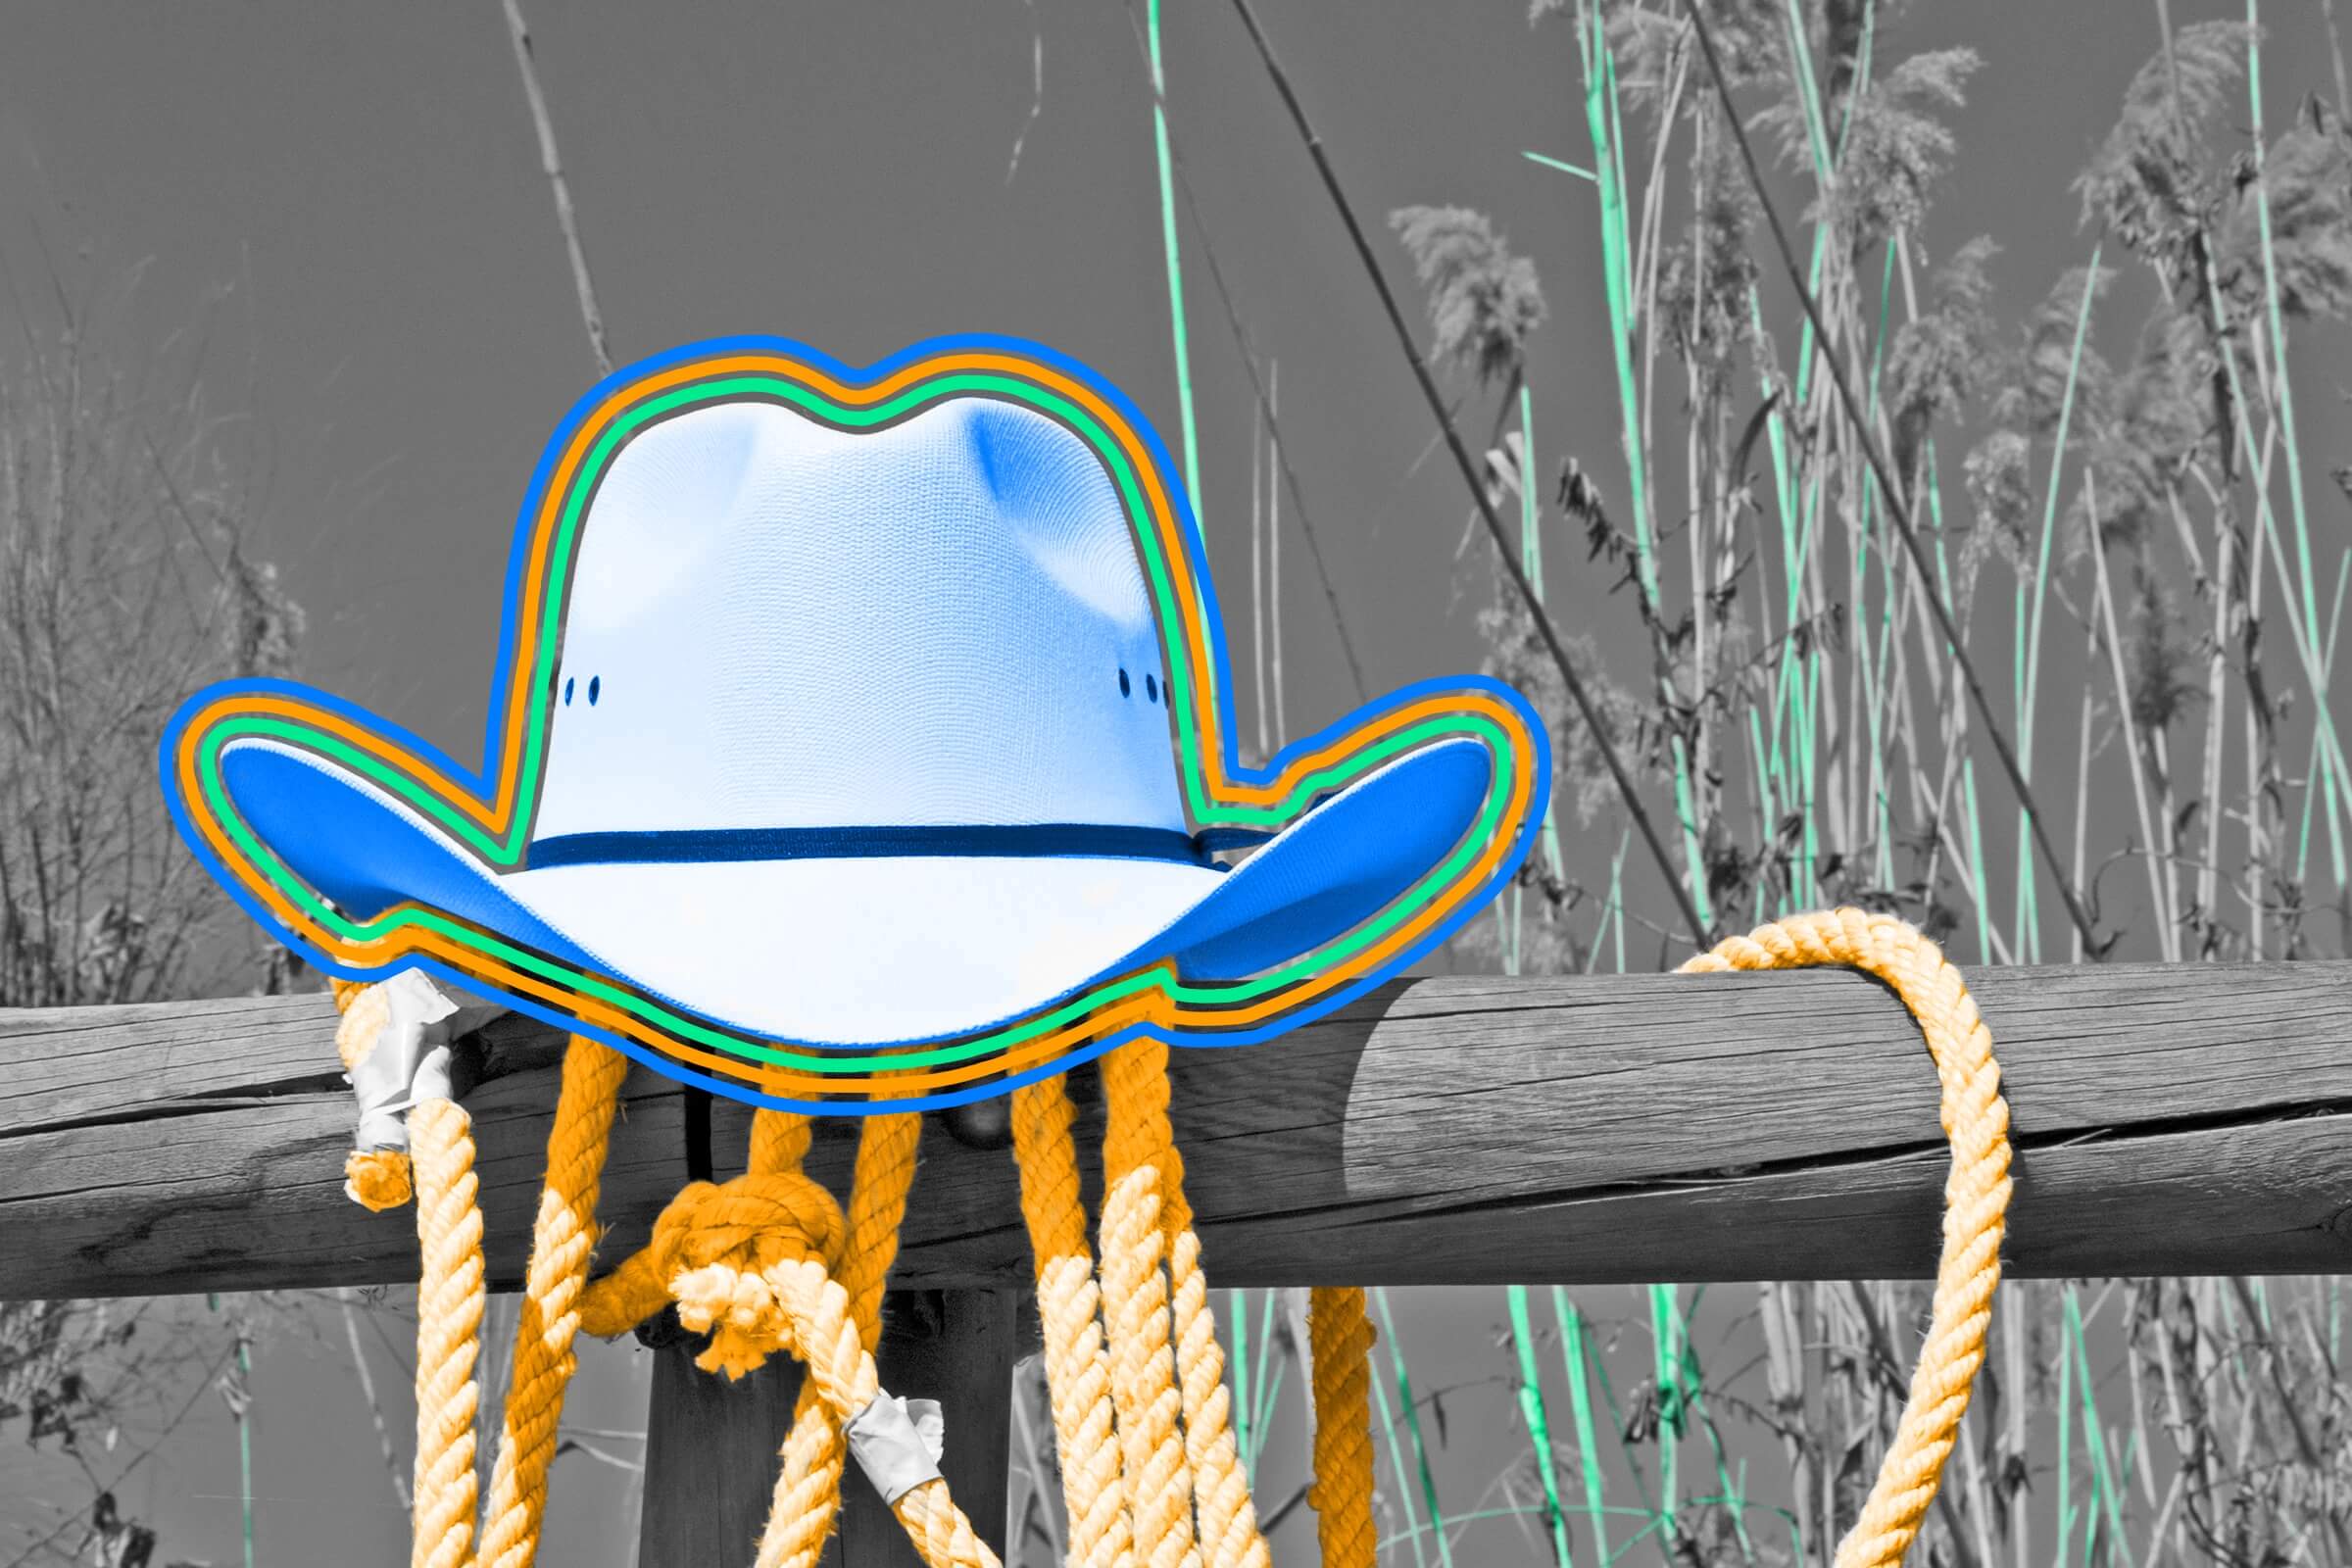 A 10-gallon hat actually only holds three-quarters of a gallon.